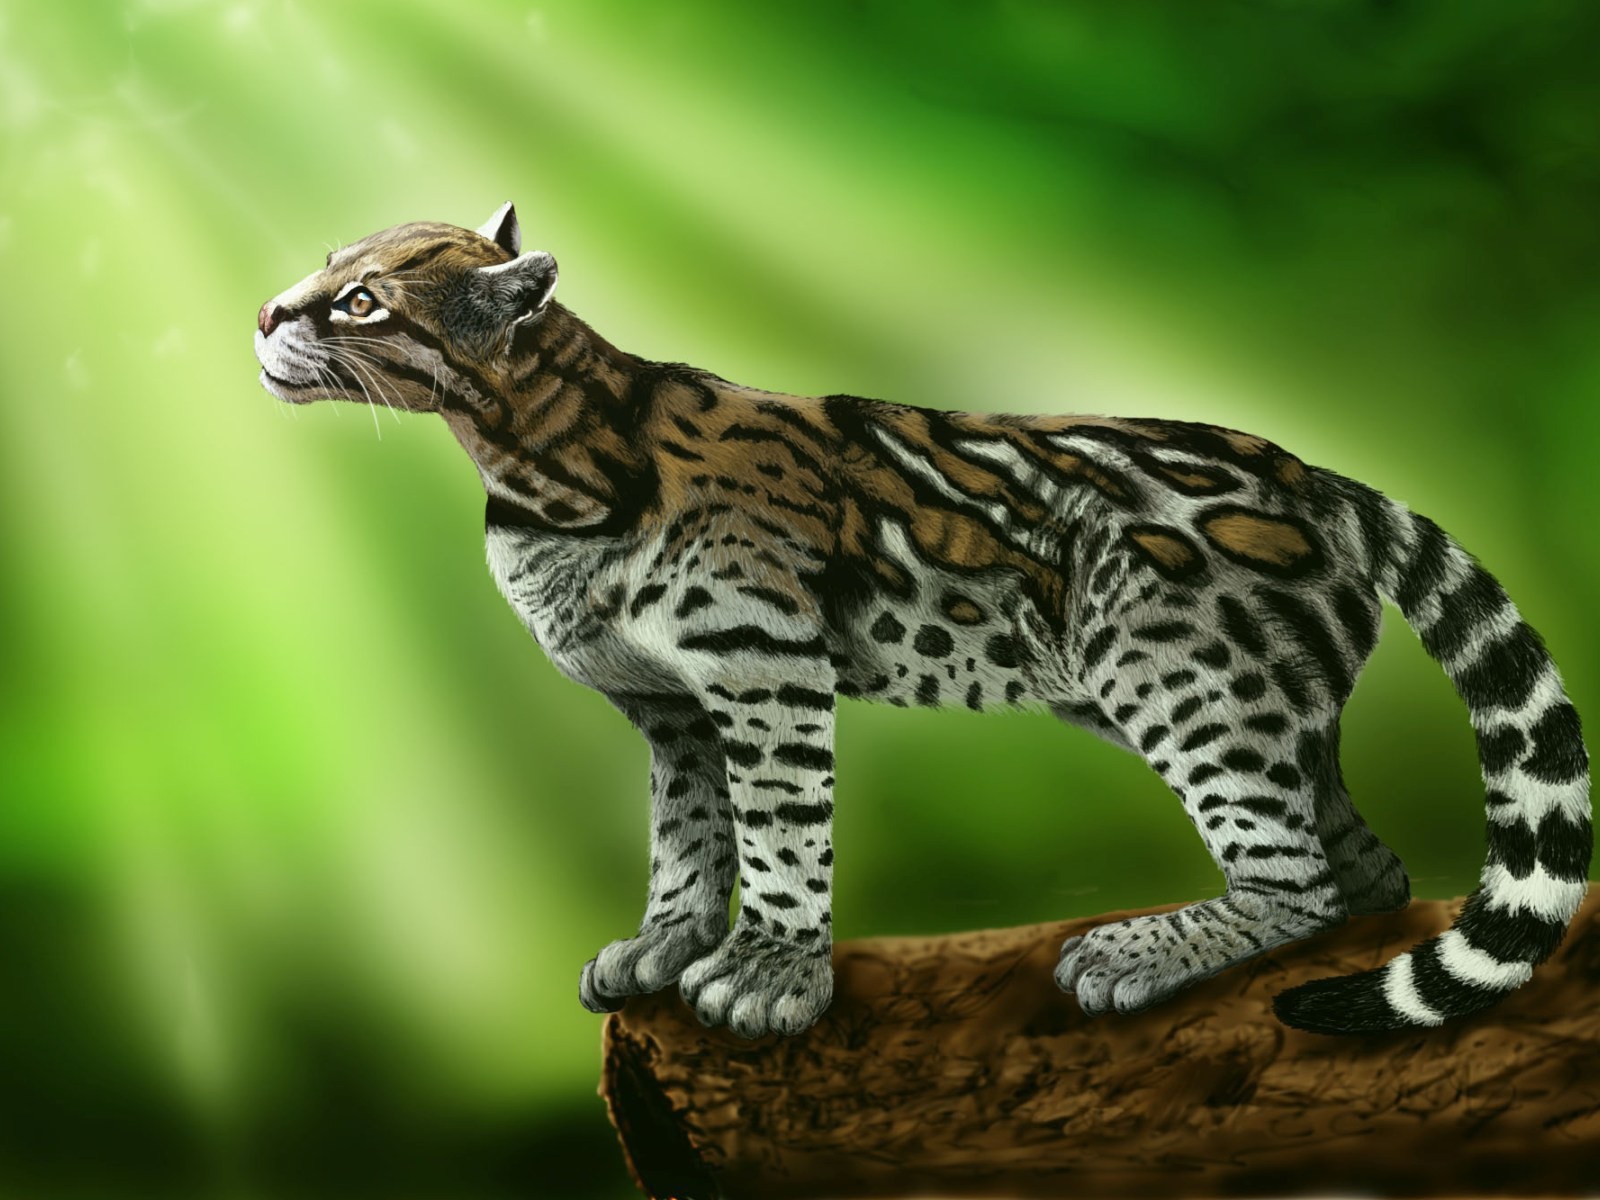 Ocelot cat stands on a green background